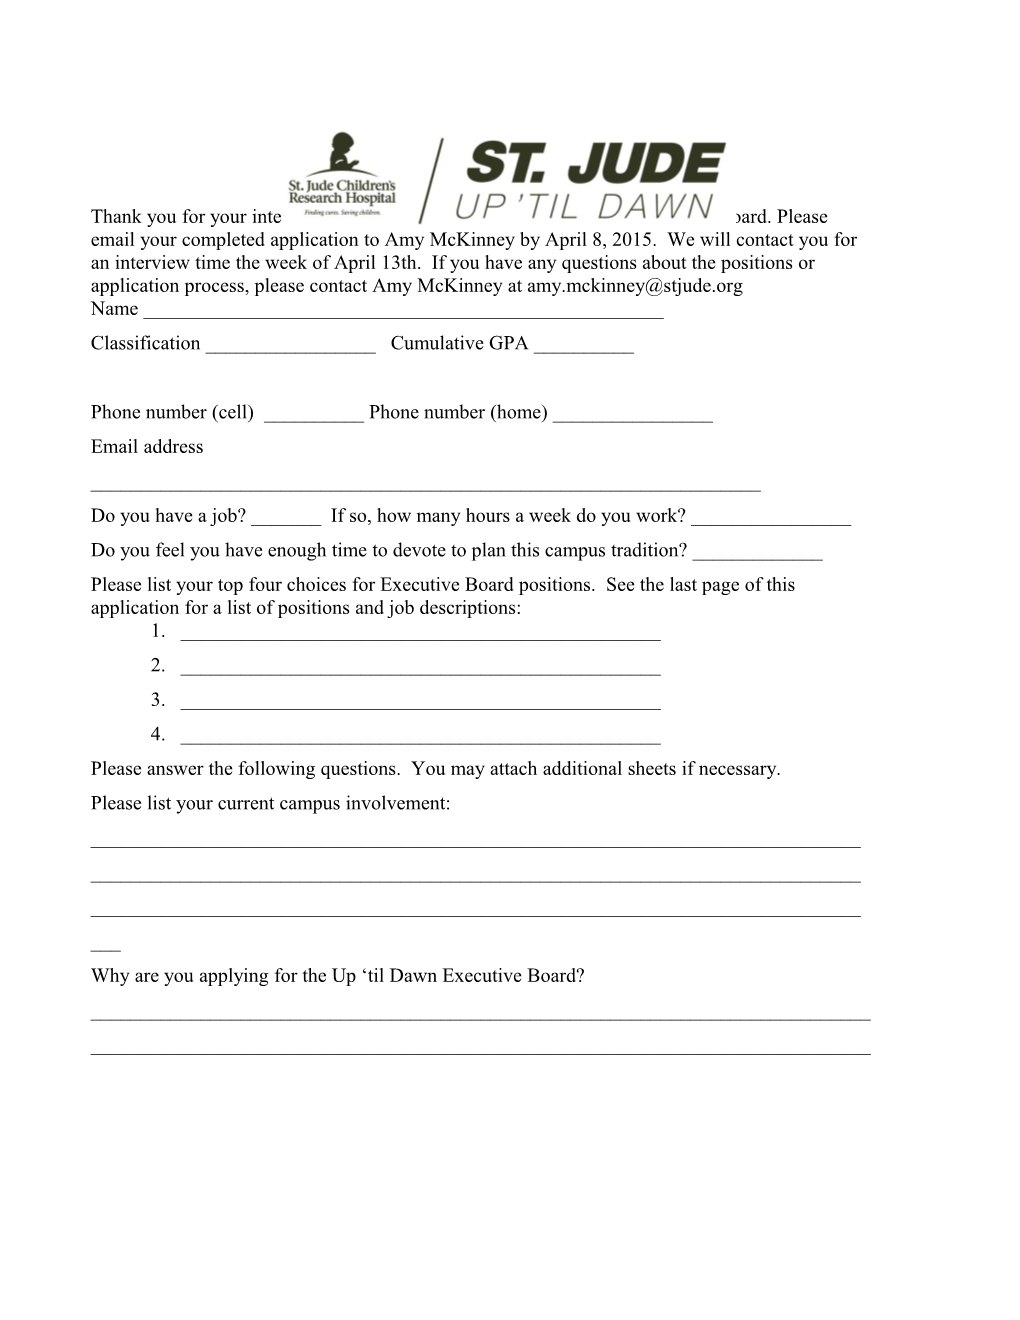 Thank You for Your Interest in Serving on the St. Jude up Til Dawn Executive Board. Please